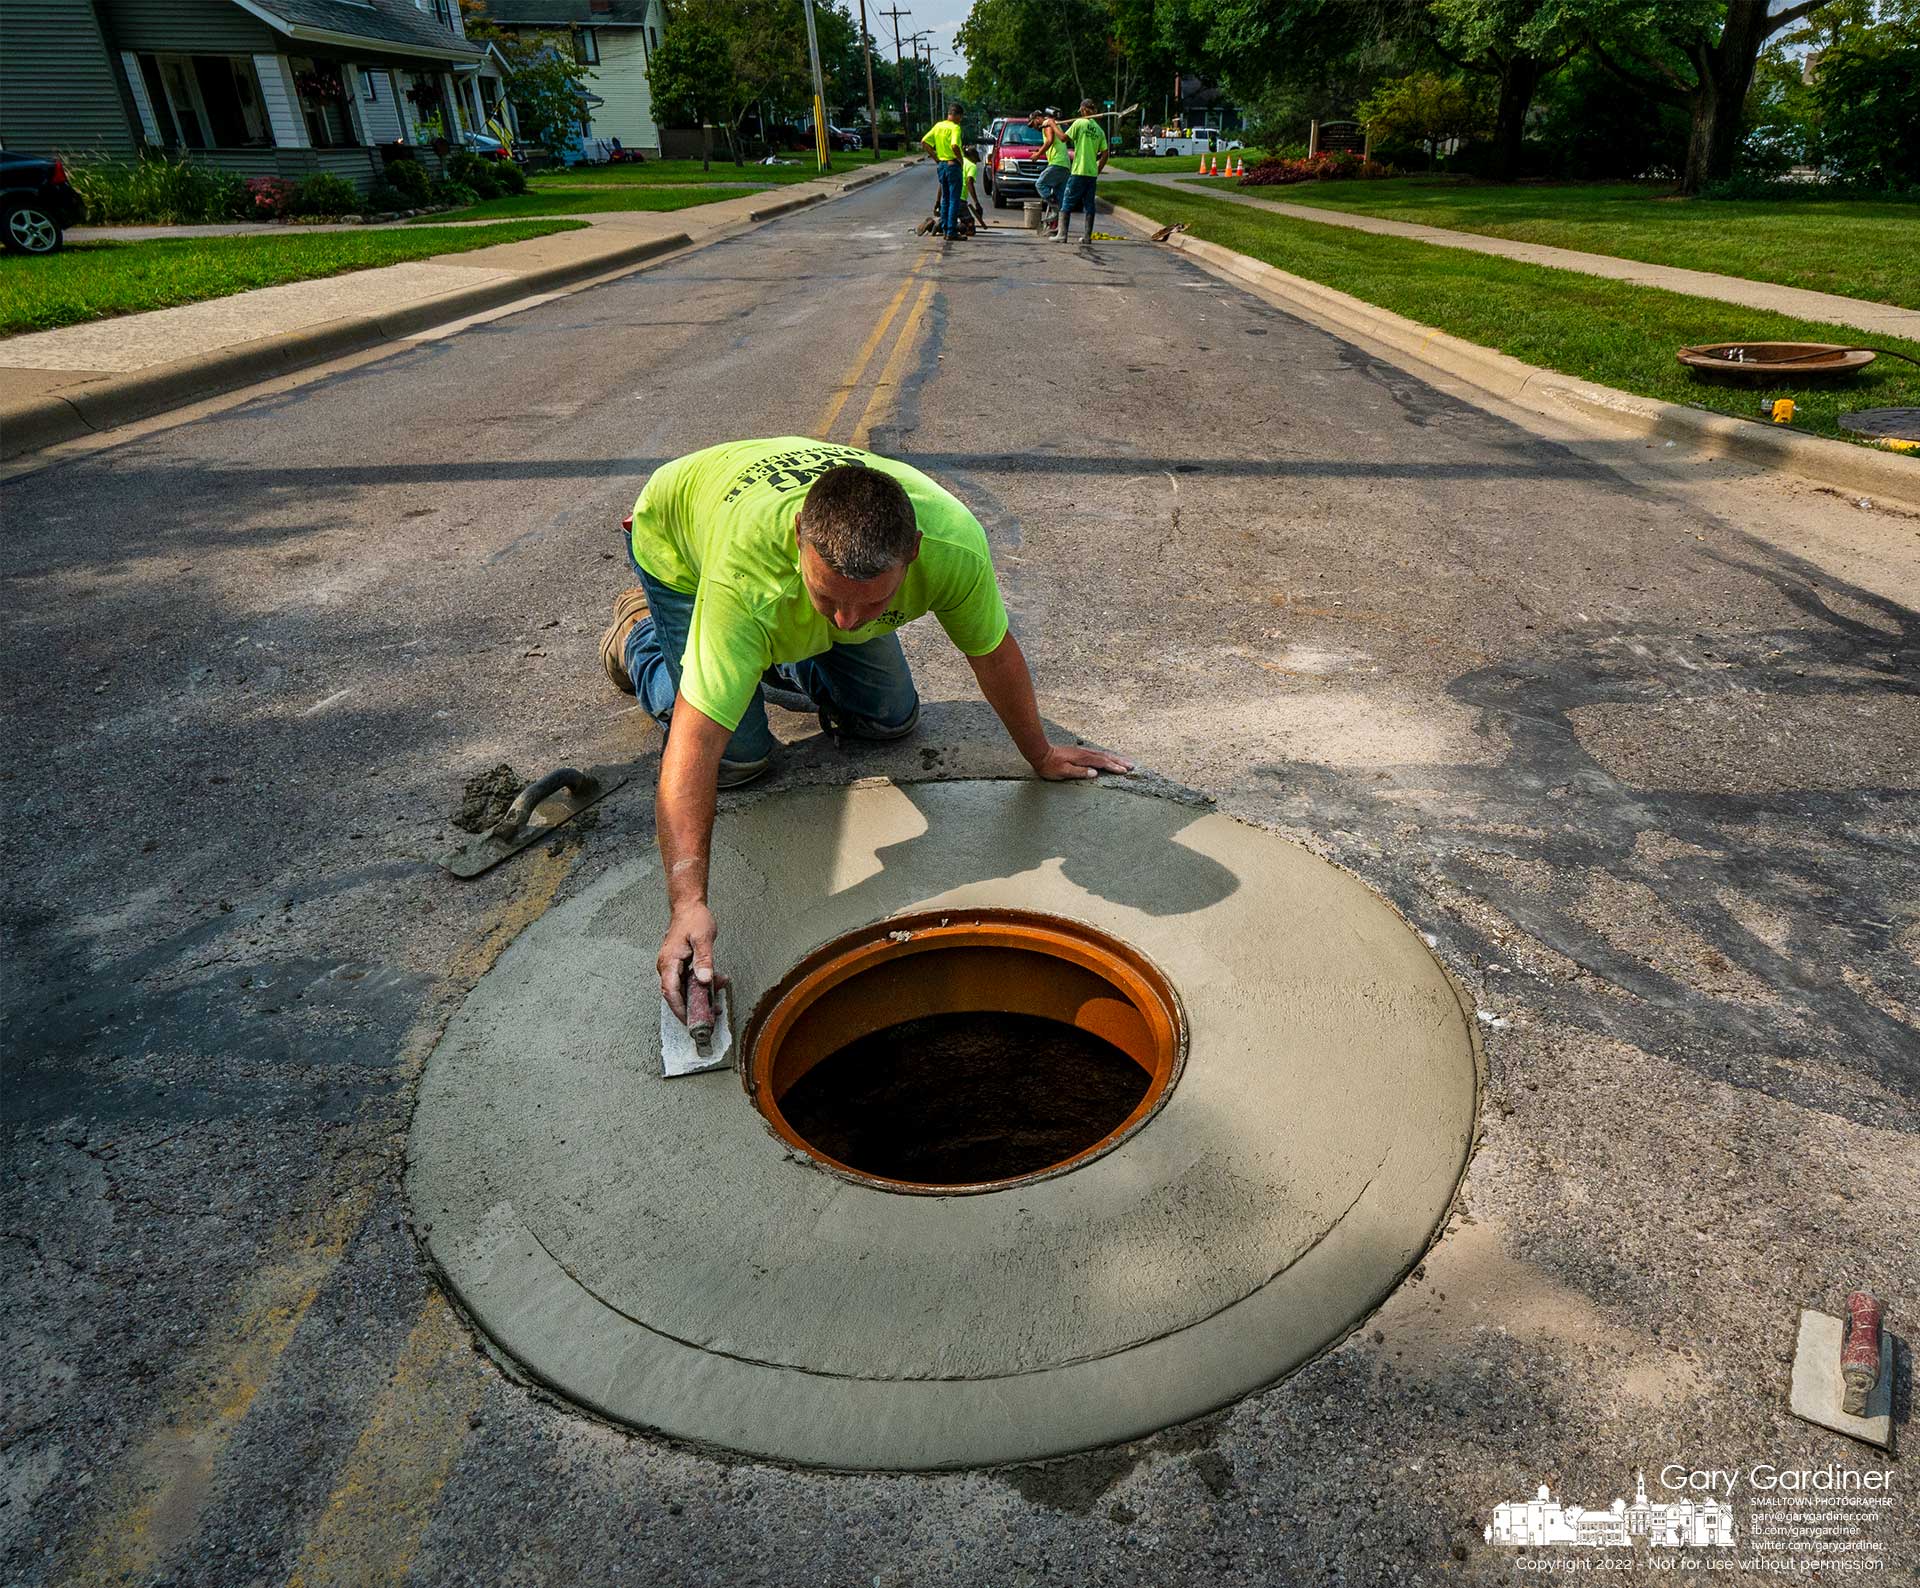 A worker smooths the edges of new concrete poured around a manhole after repairs to several manholes on East Walnut near State Street. My Final Photo for Sept. 16, 2022.